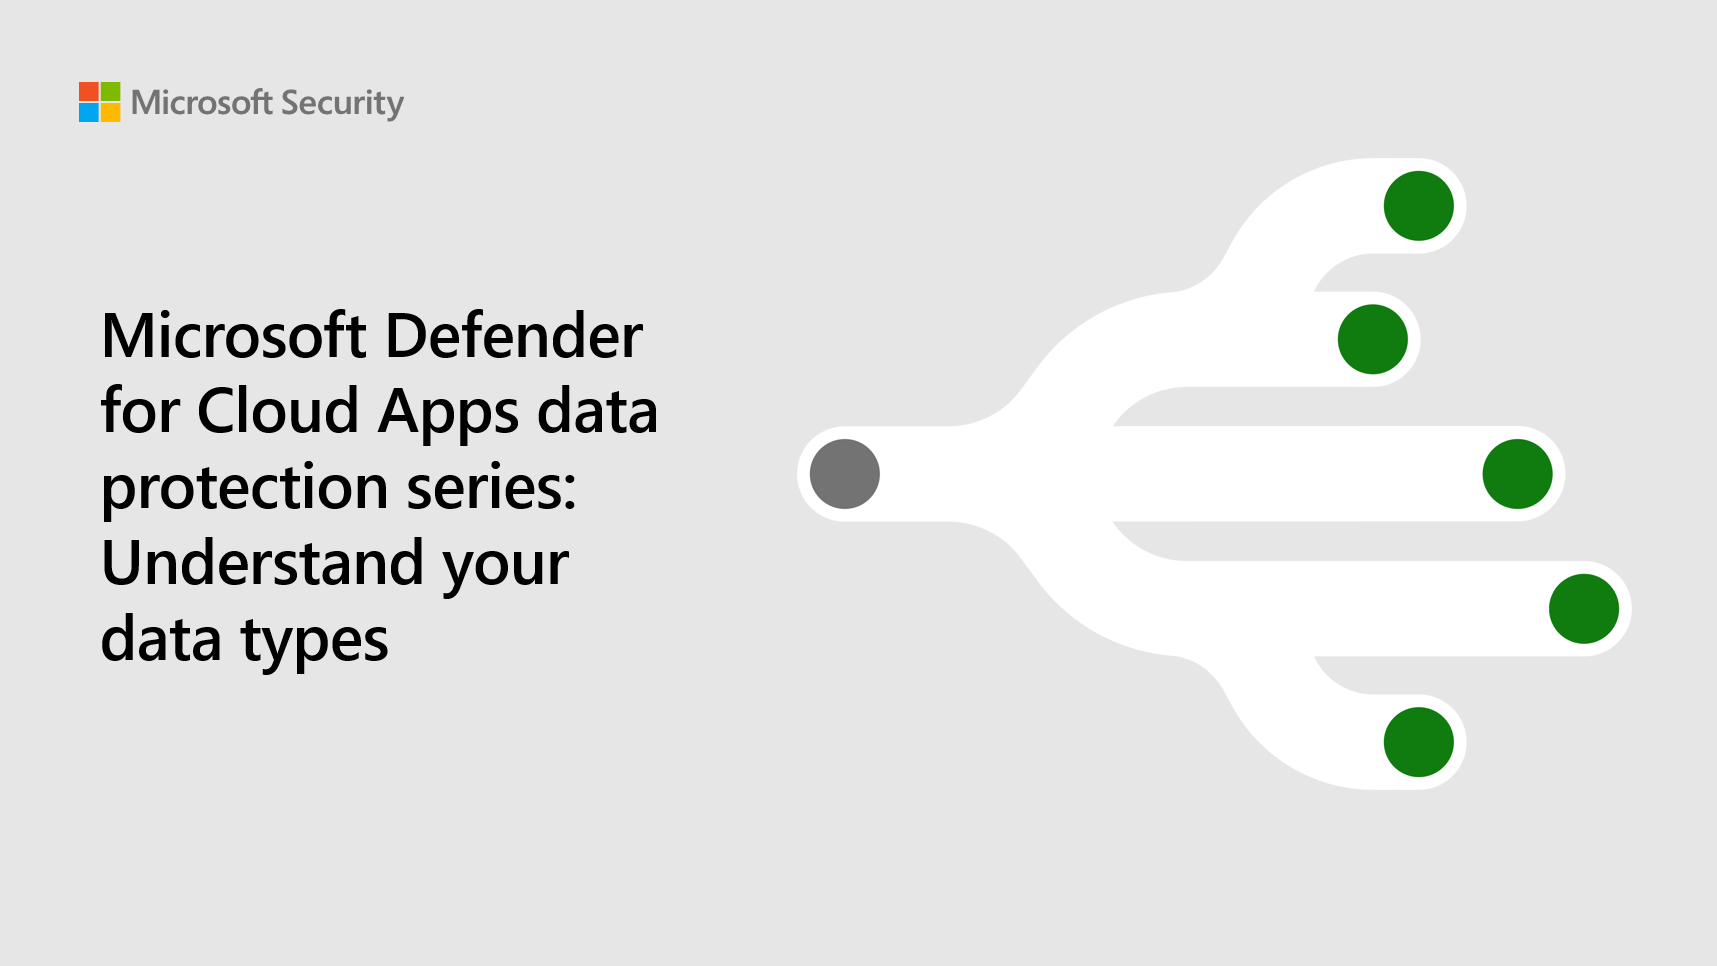 Microsoft Defender for Cloud Apps data protection series: Understand your data types